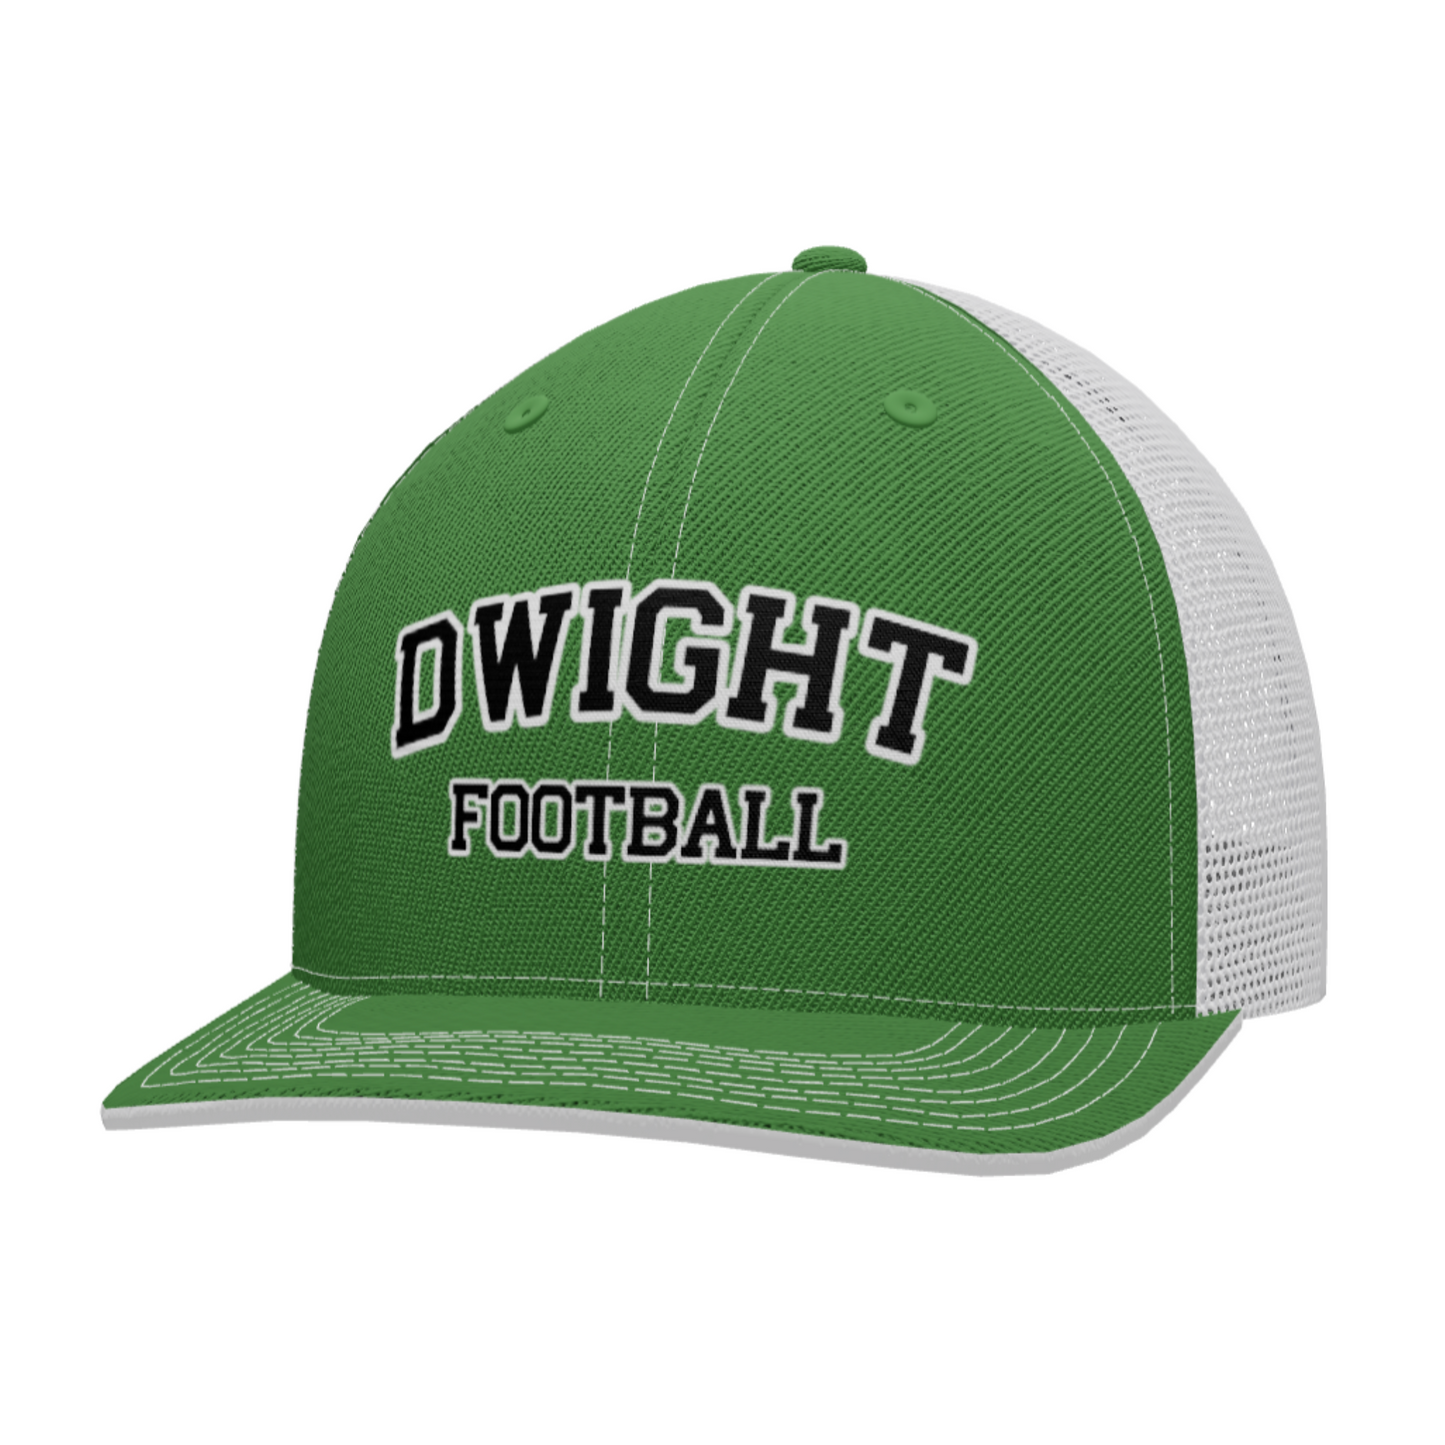 Dwight Football Fitted Mesh Trucker Hat - Green/White